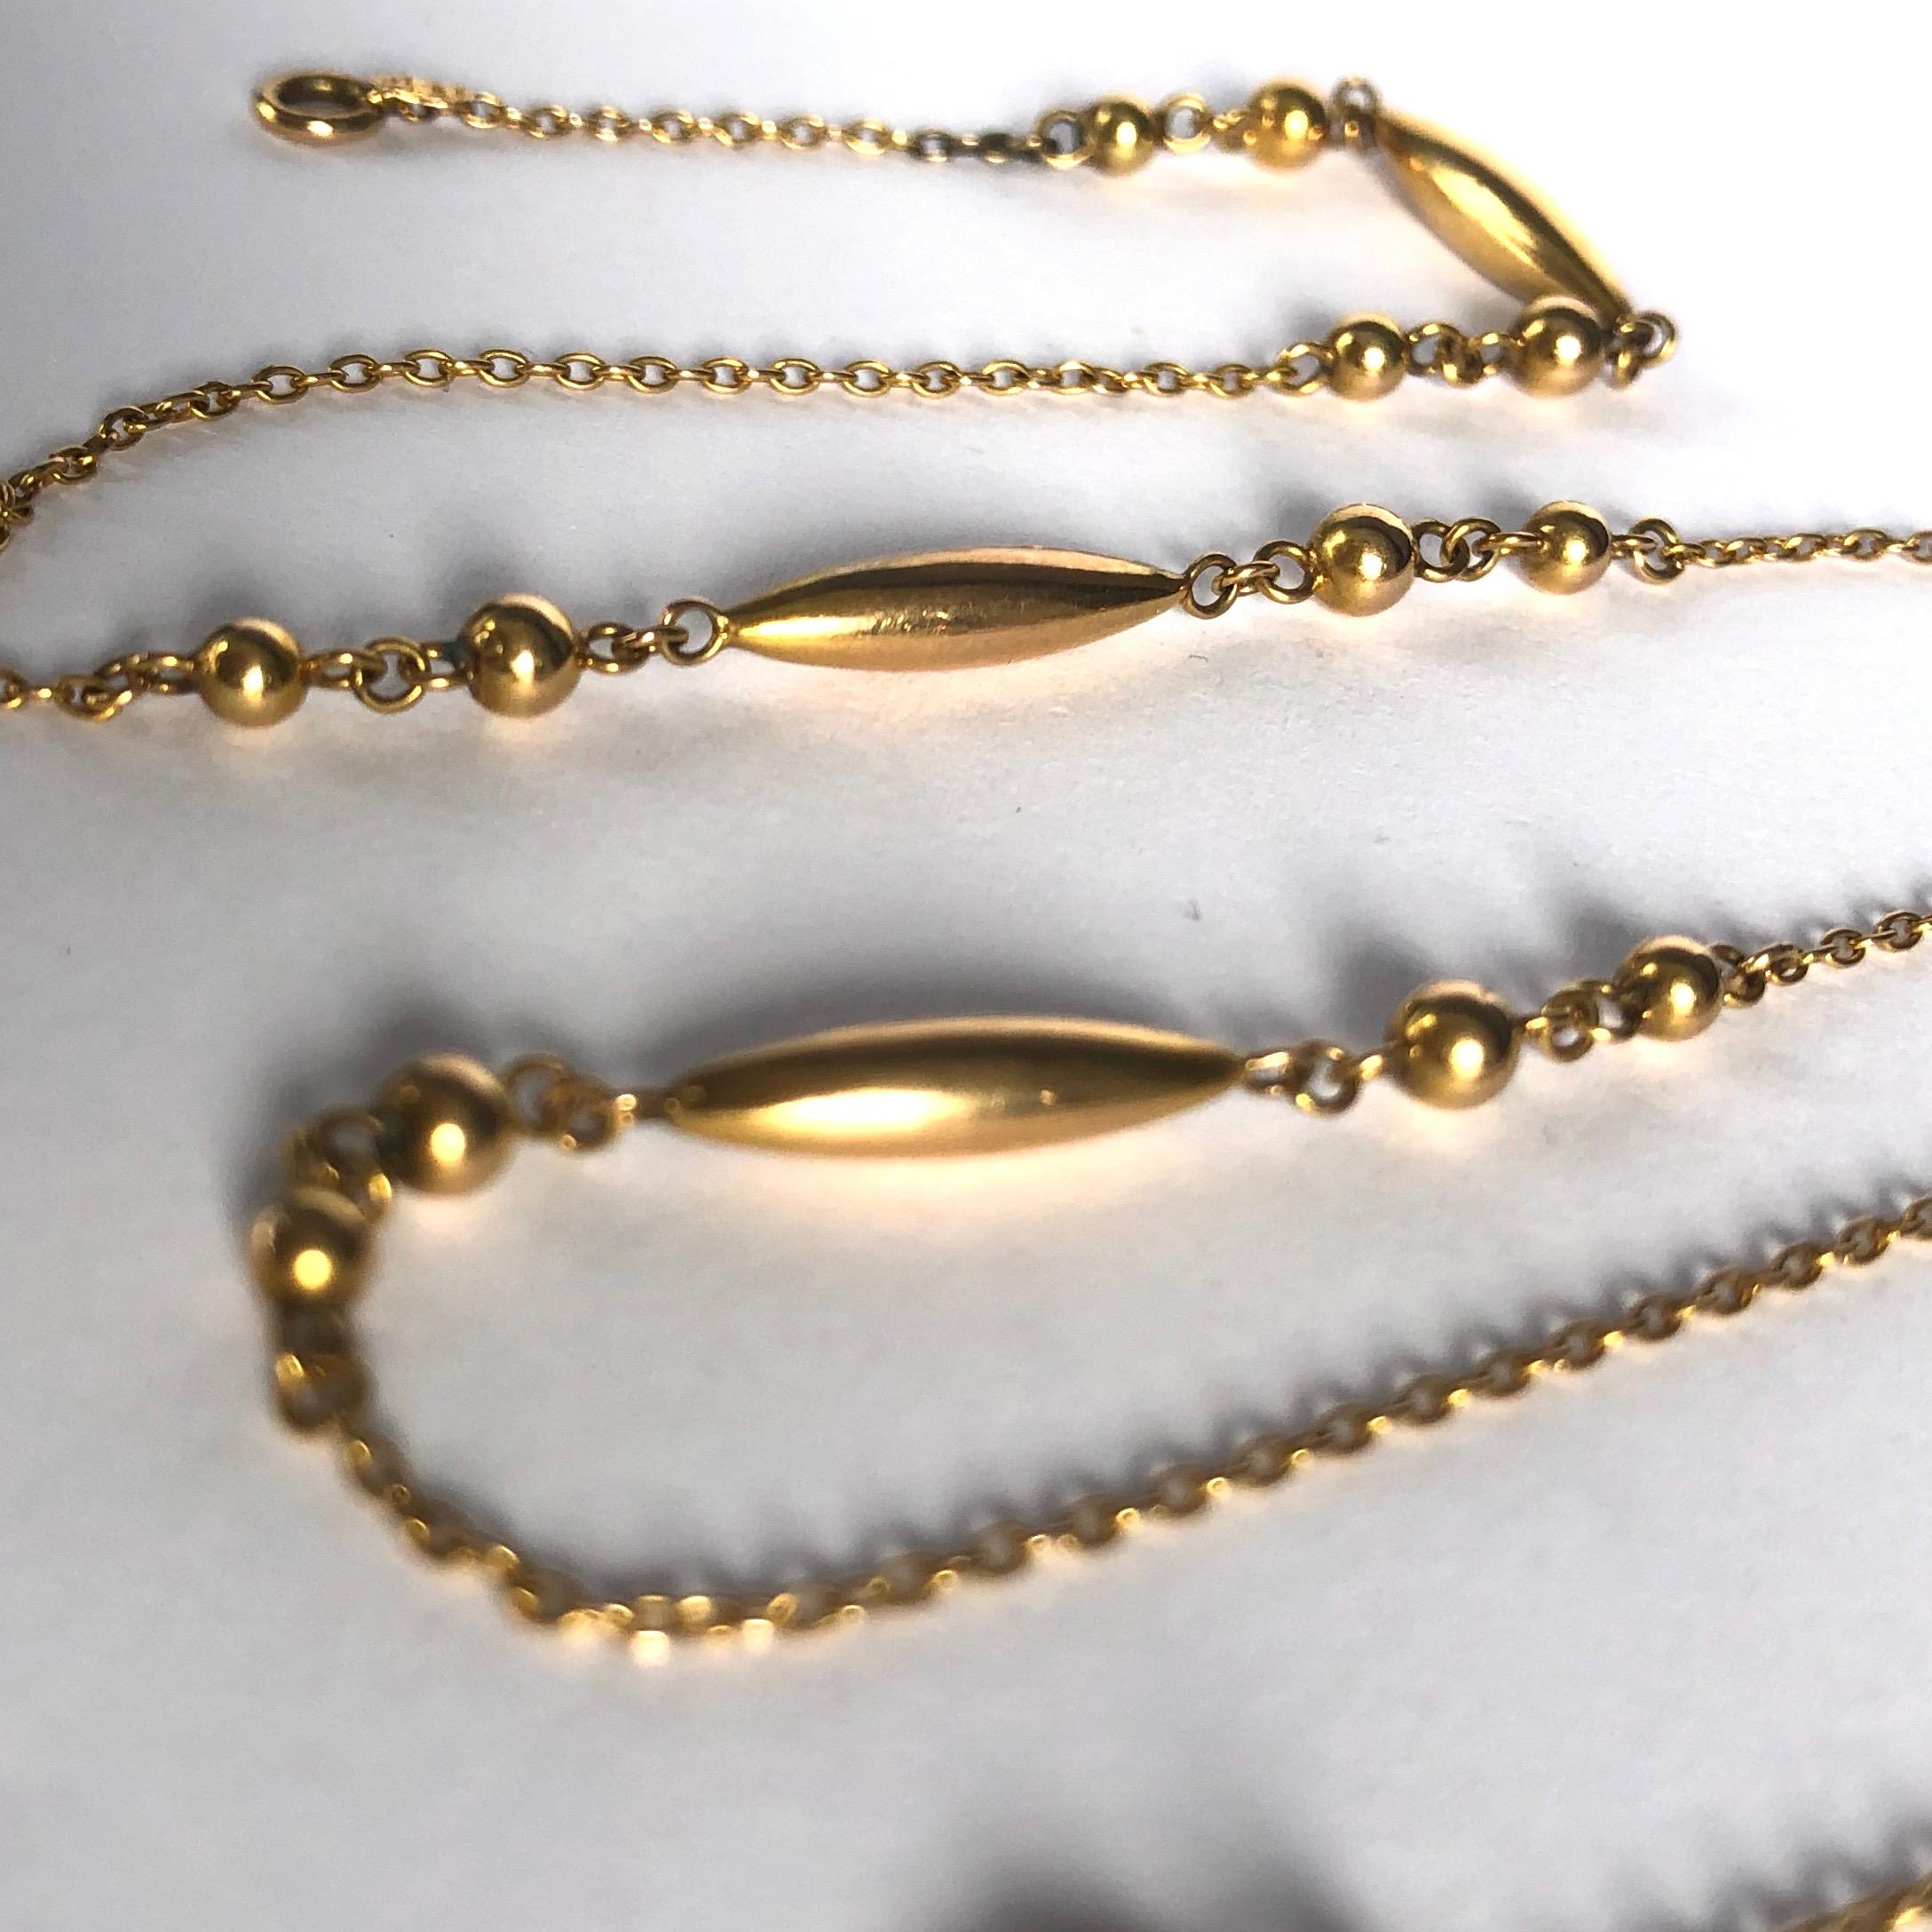 This 9ct yellow gold necklace is made up of slim oval links and gold orbs. The chain fastens using a bolt clasp and has a delicate and stylish feel. 

Length: 39cm 
Width: 2mm 

Weight: 3.46g